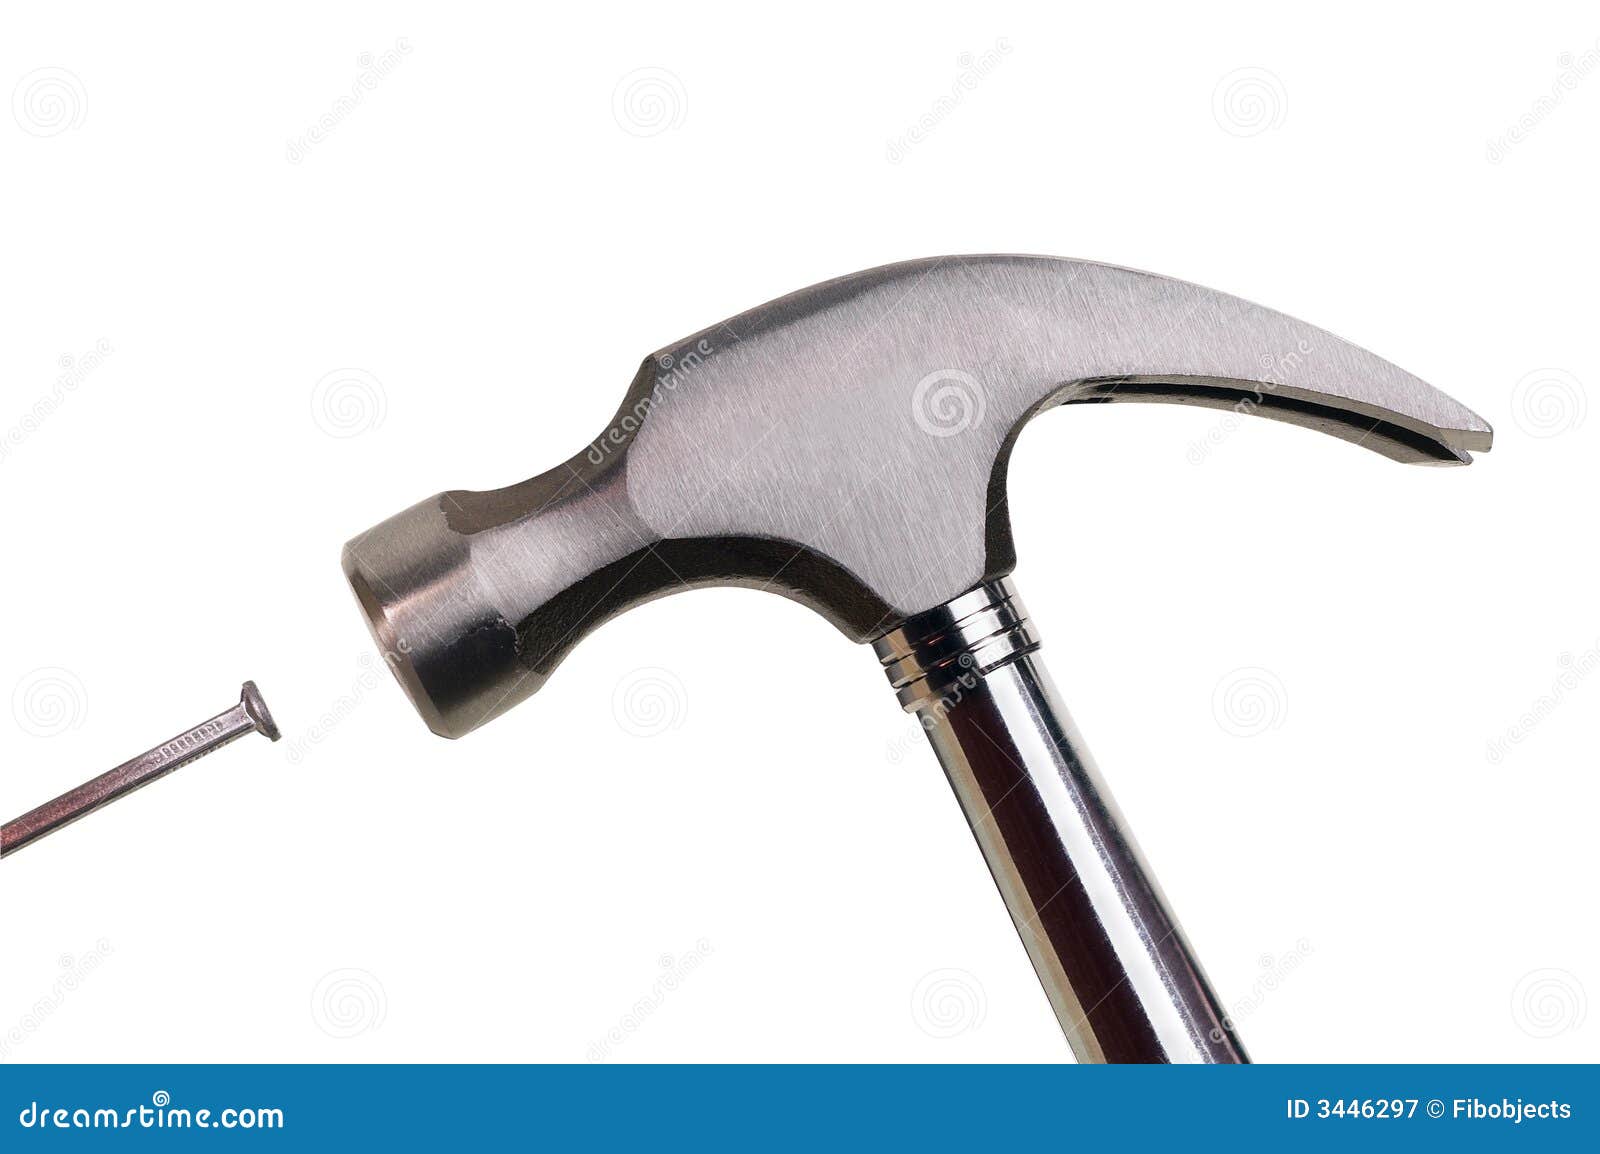 free clipart hammer and nails - photo #39